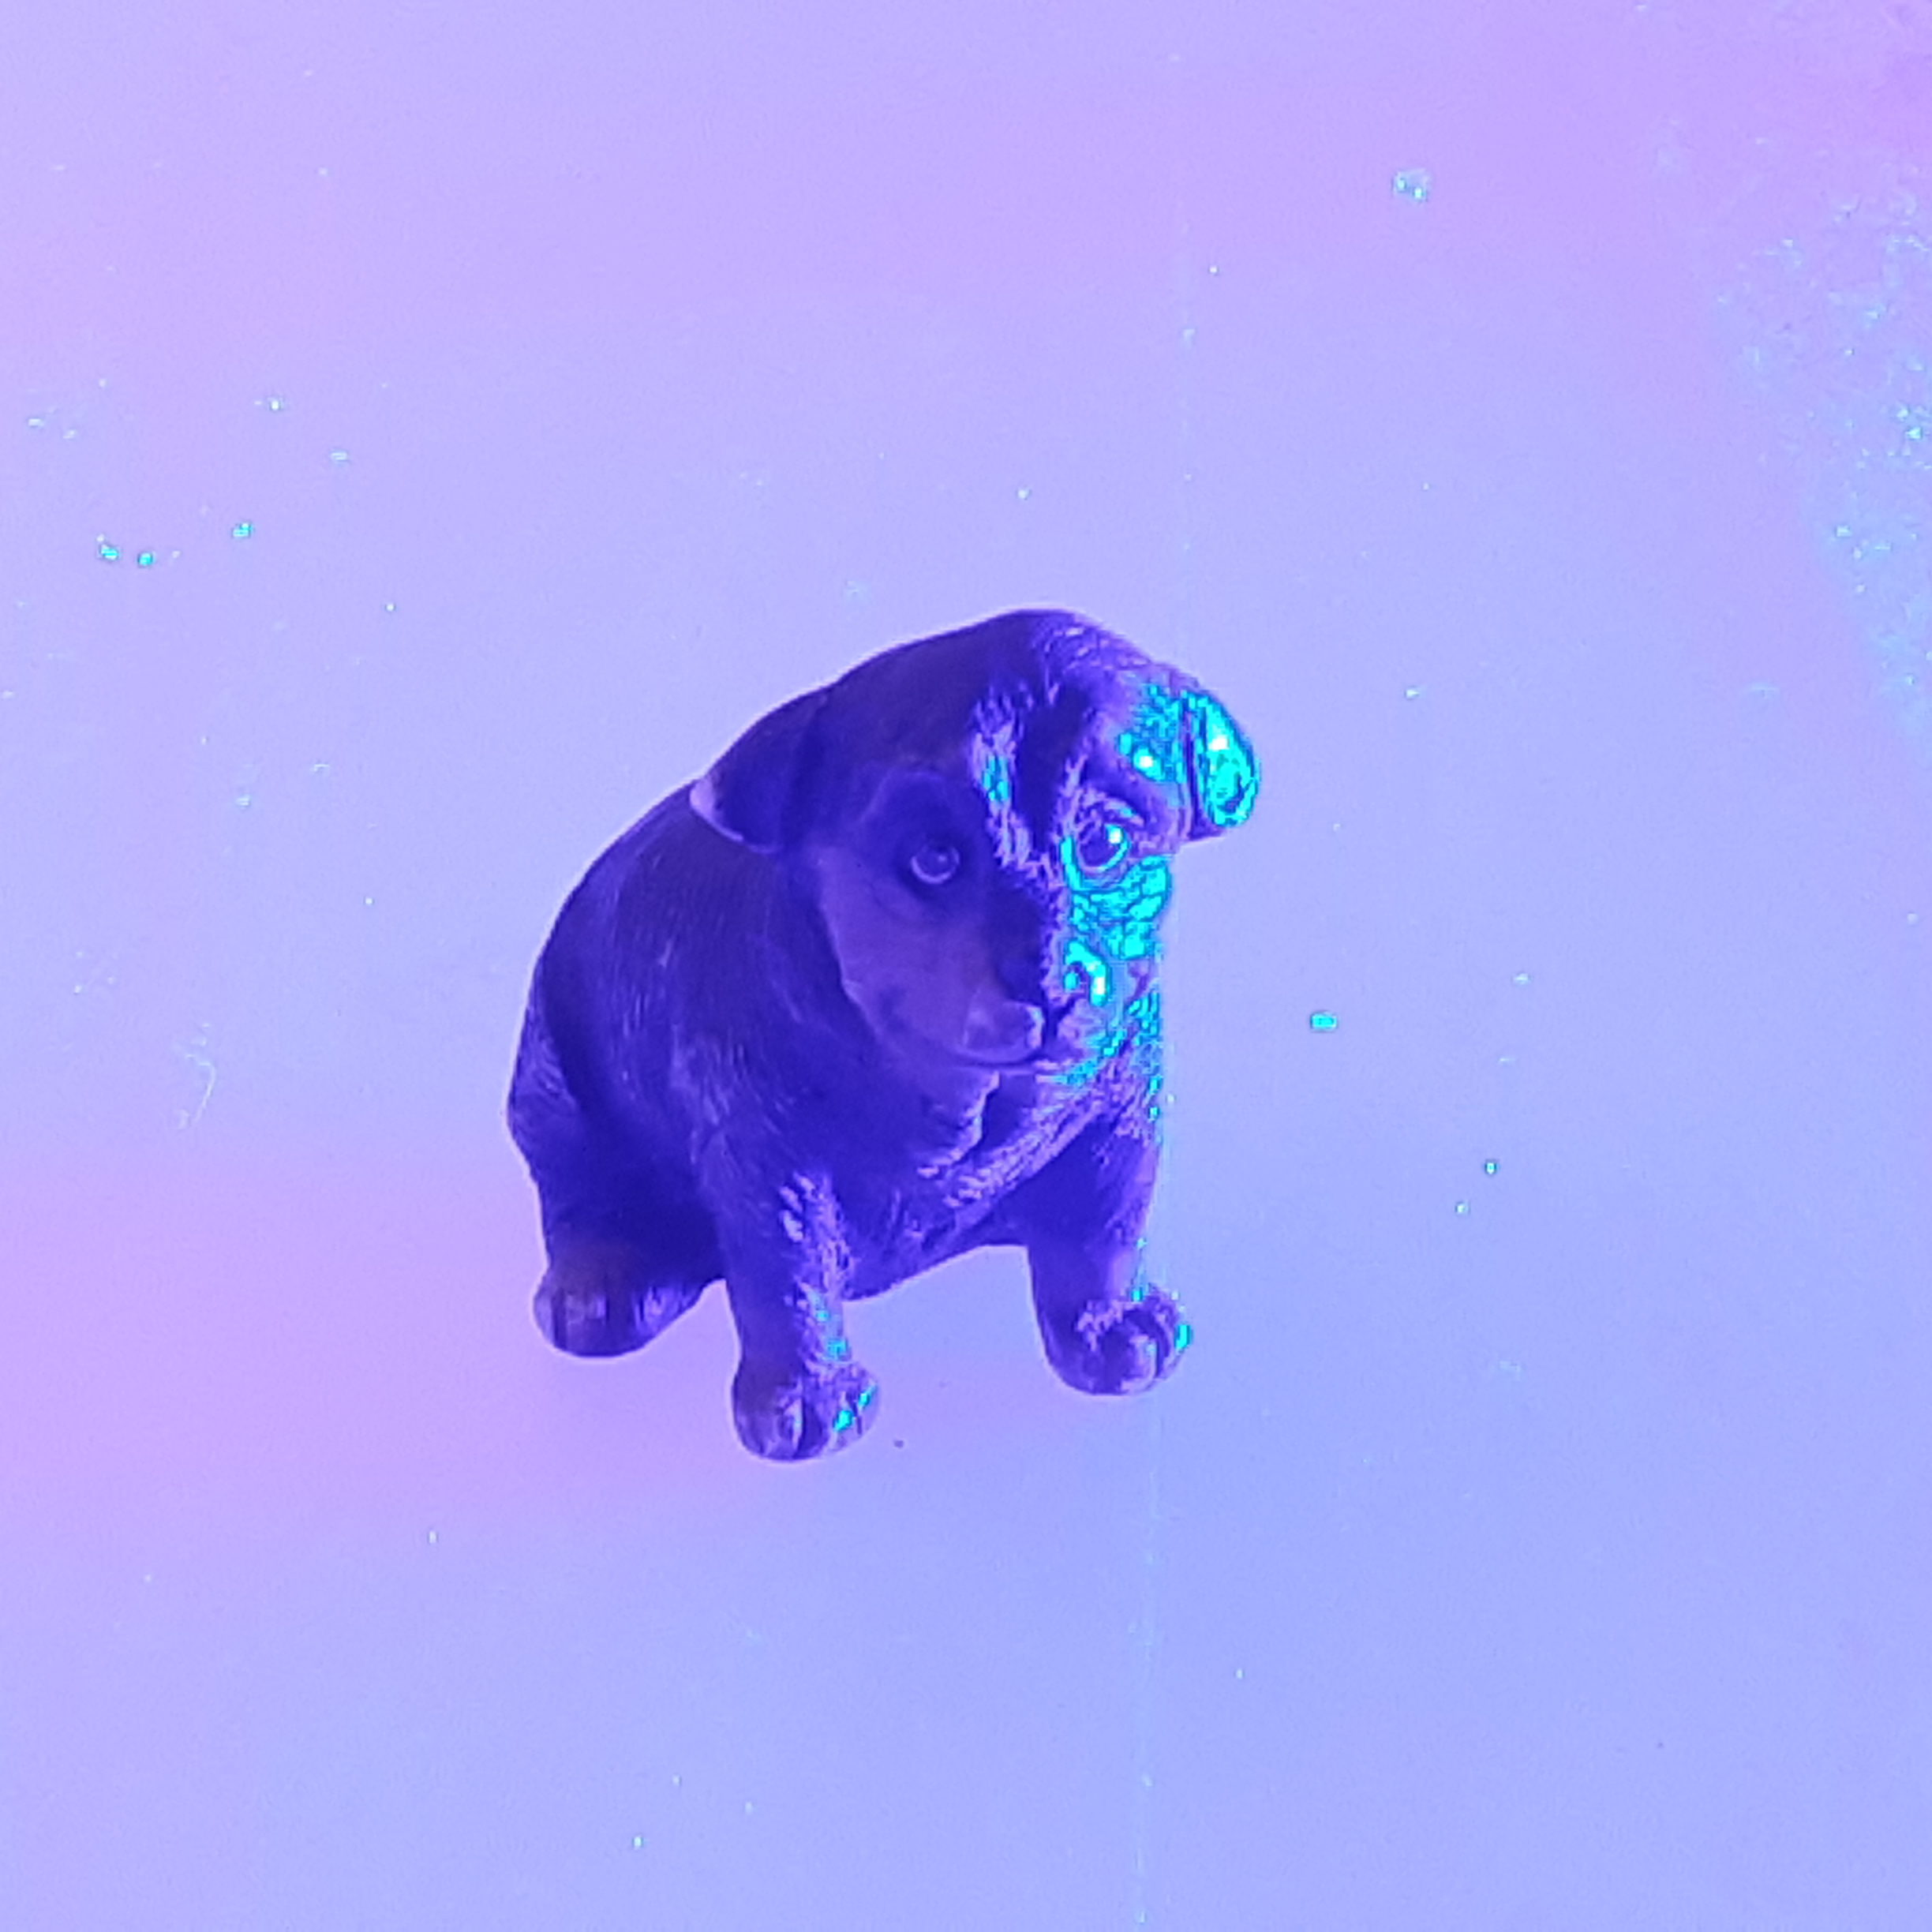 Show Dawg on ice